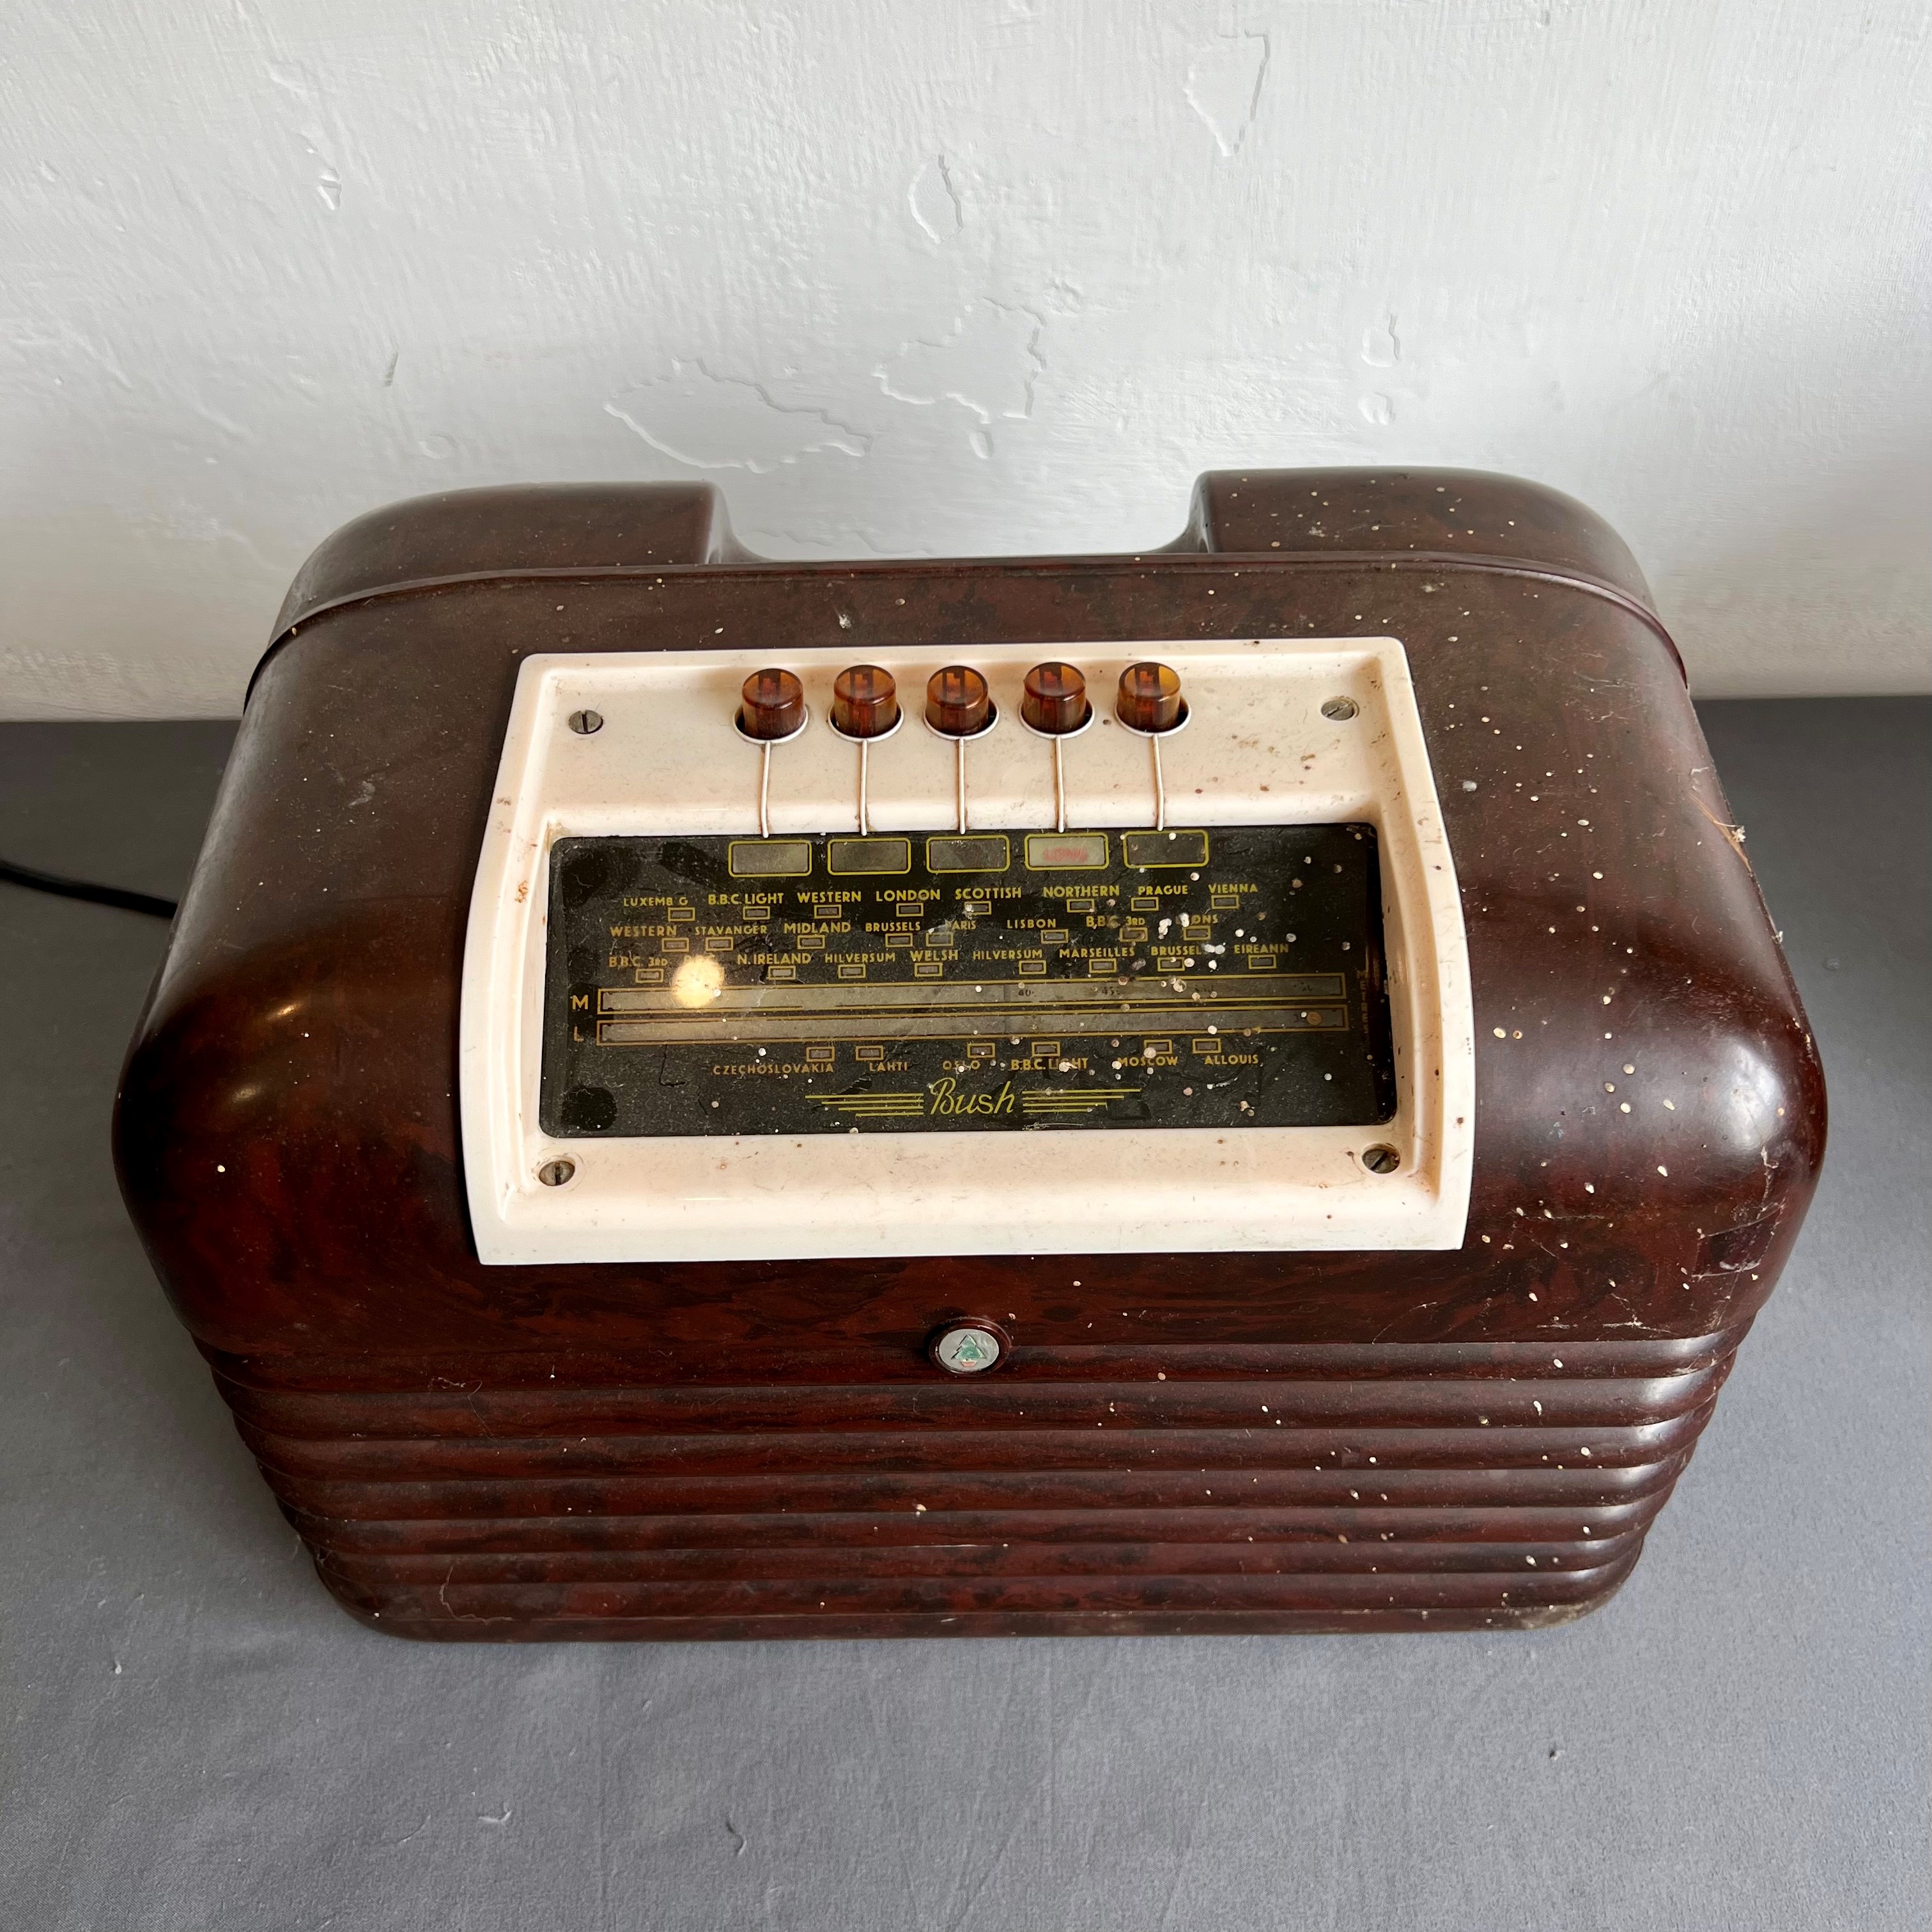 Two Bush bakelite radios - 1950s, comprising a DAC 90A and a DAC 10, both with brown bakelite cases, - Bild 4 aus 8